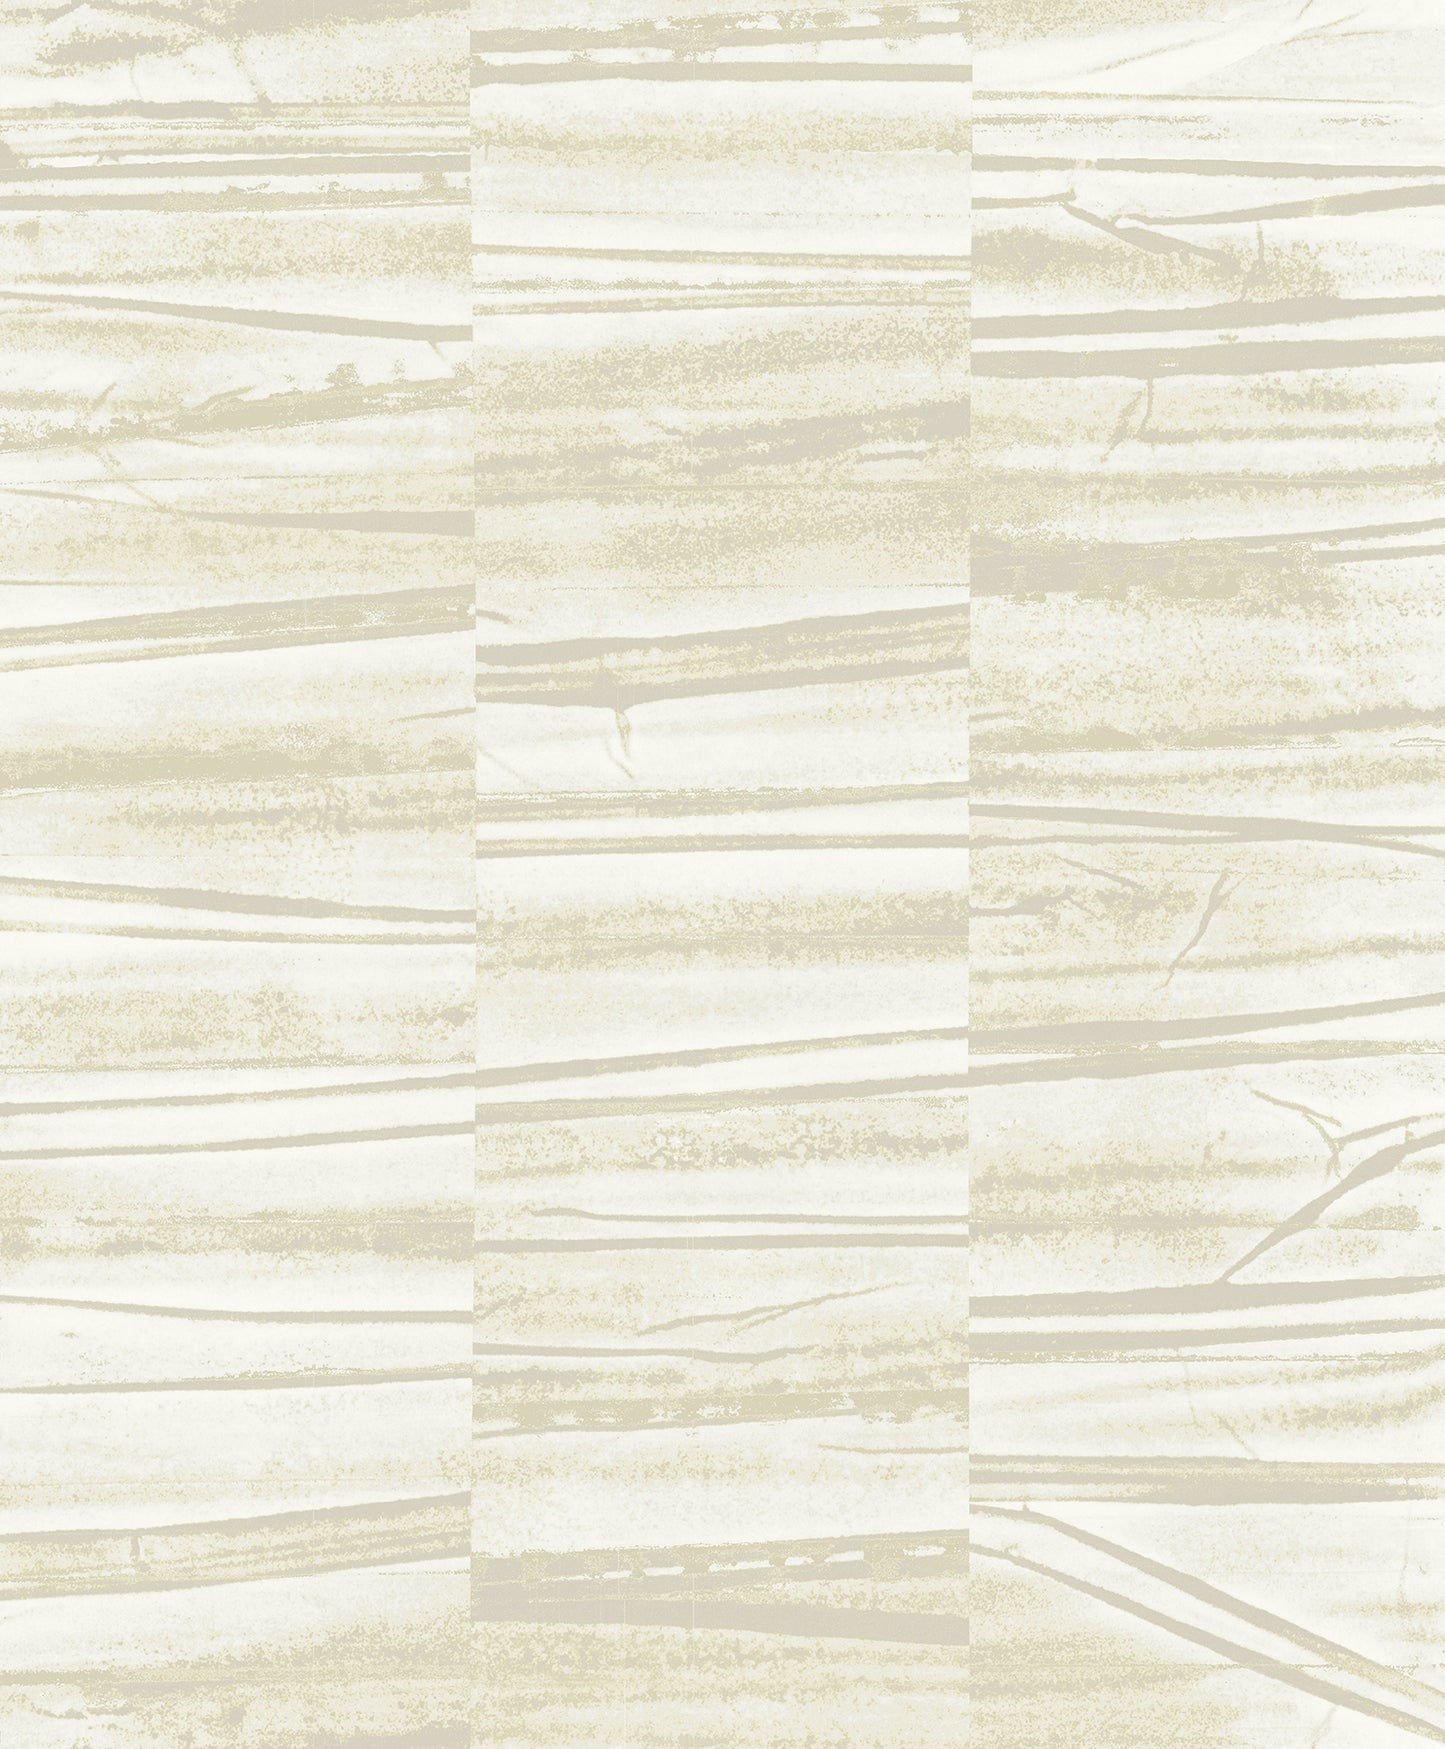 Acquire 2908 87120 Alchemy Lithos Light Yellow Geometric Marble A Street Prints Wallpaper